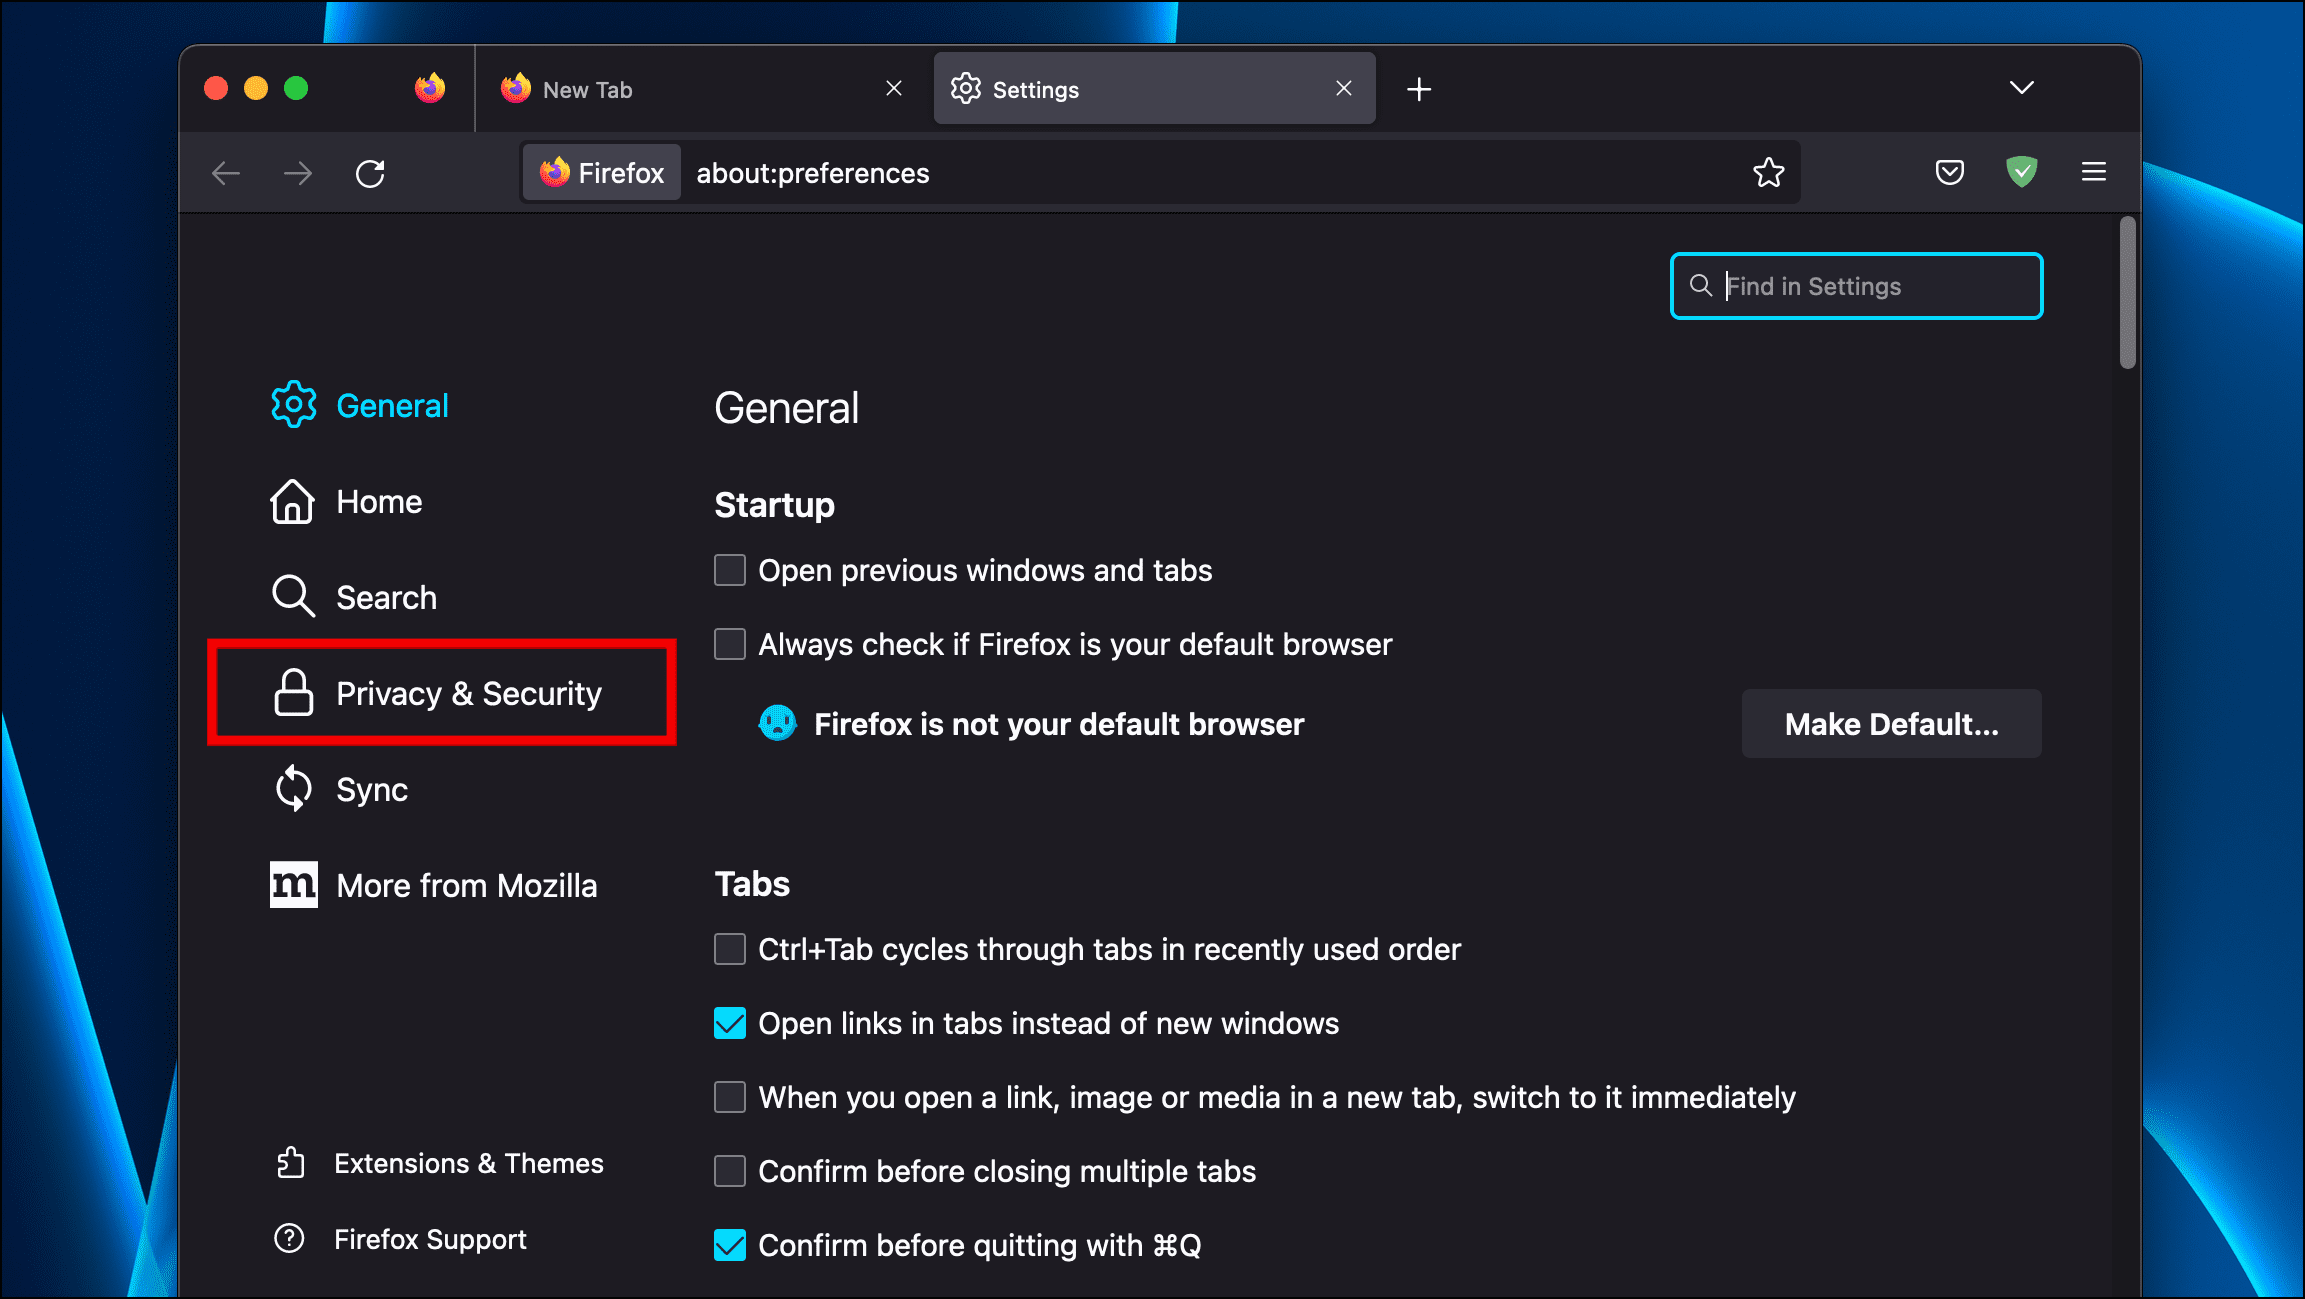 Disable Sponsored Suggestions in Firefox Address Bar